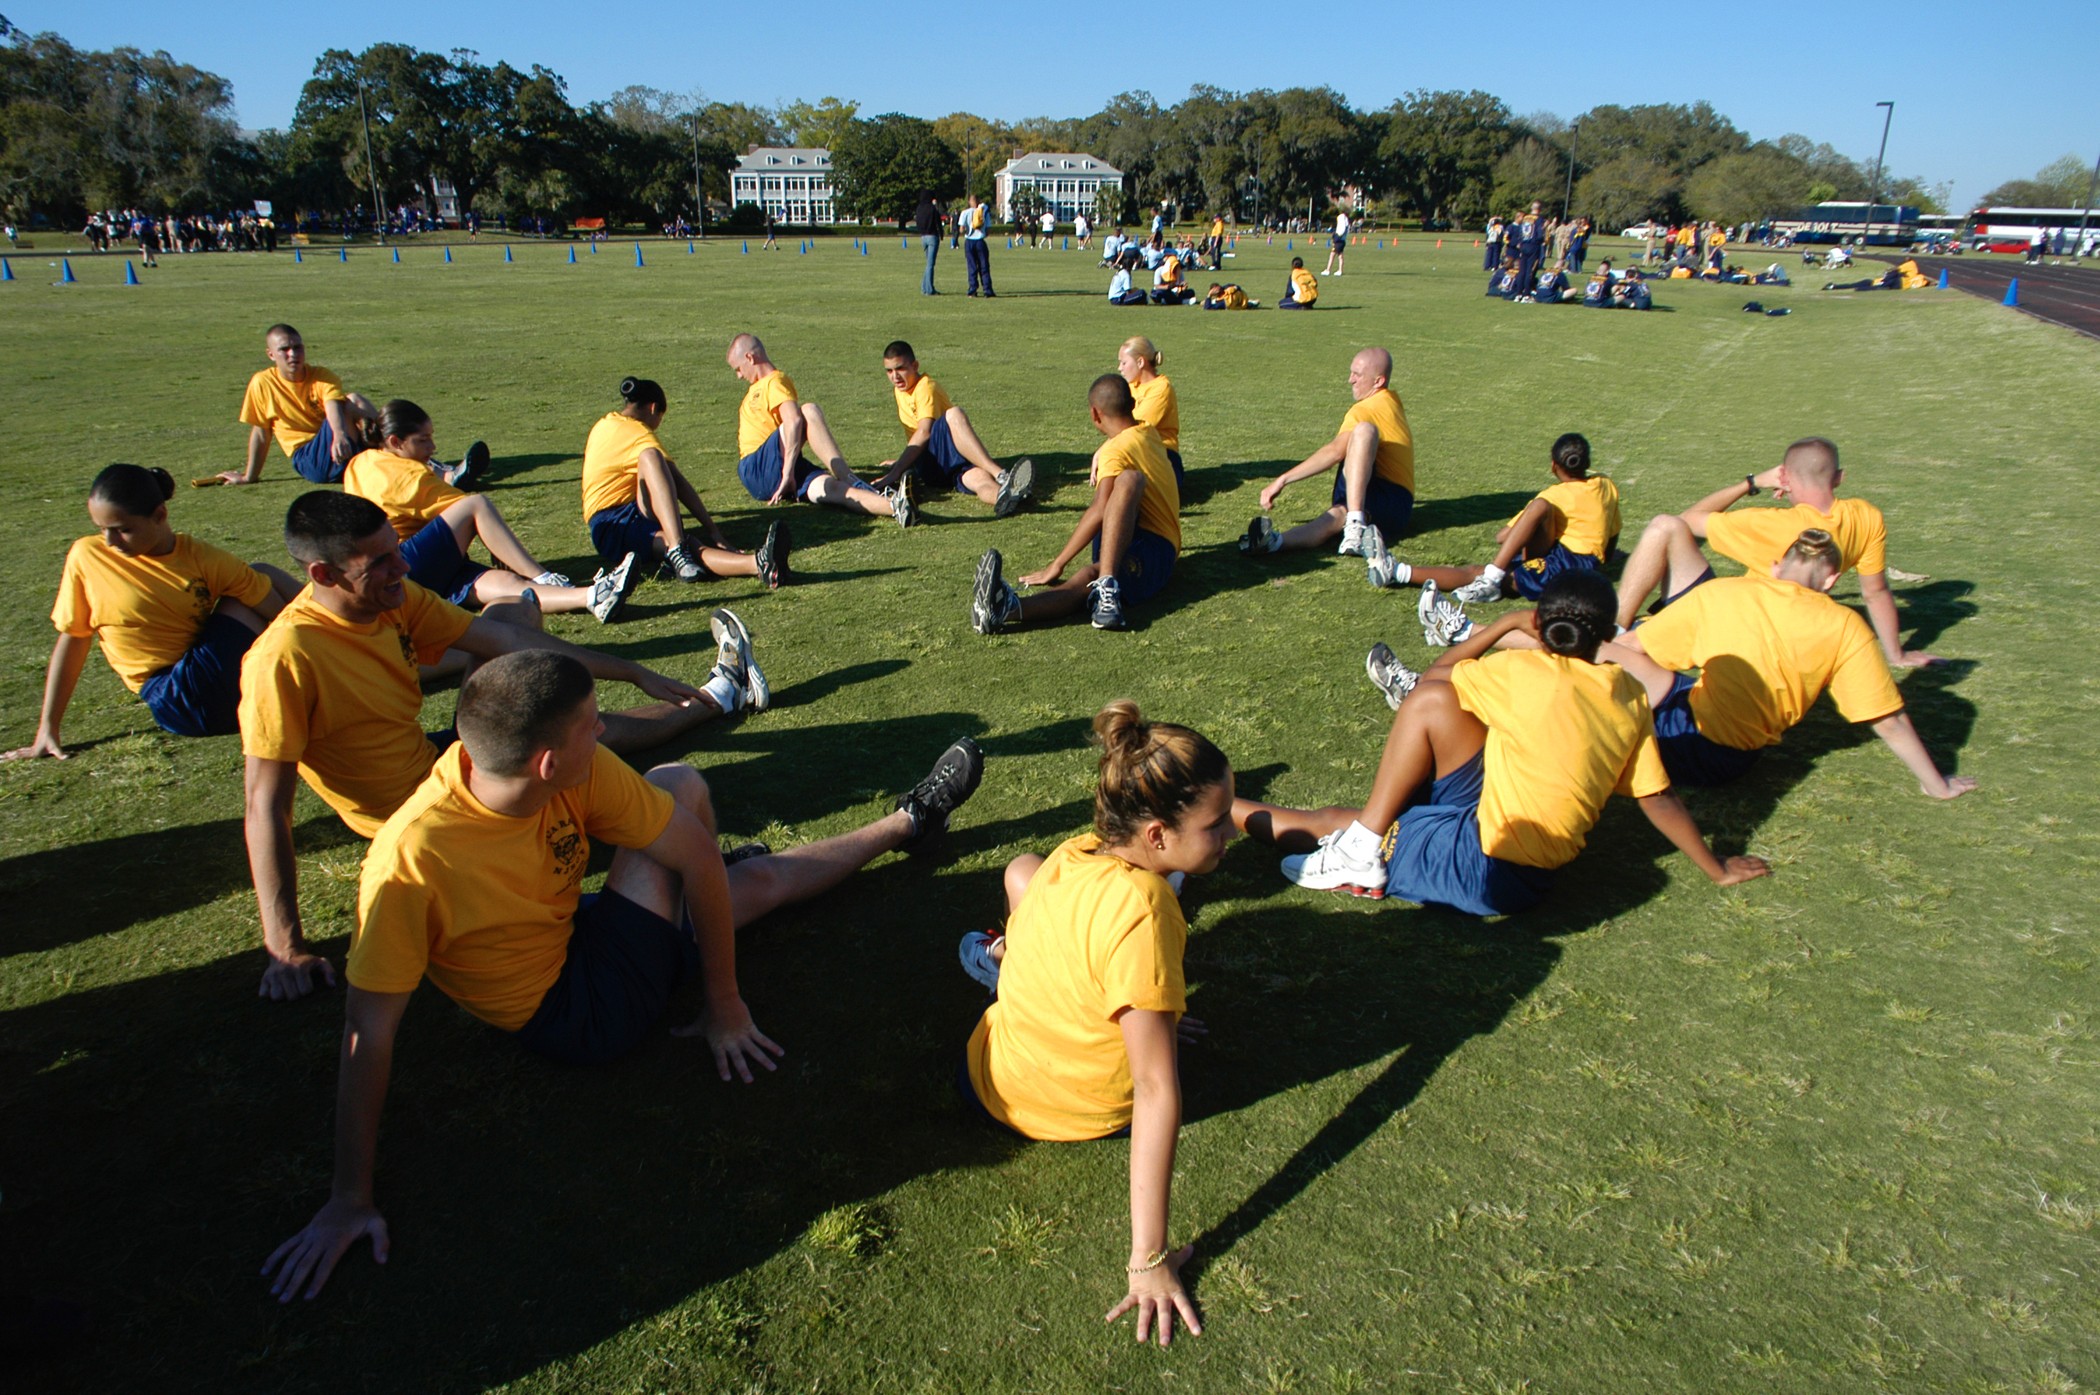 US_Navy_040302-N-5328N-005_Naval_Junior_Reserve_Officers_Training_Corps_%28NJROTC%29_cadets_from_Boca_Raton_Community_High_School,_Fla.,_stretch_before_a_track_and_field_event.jpg